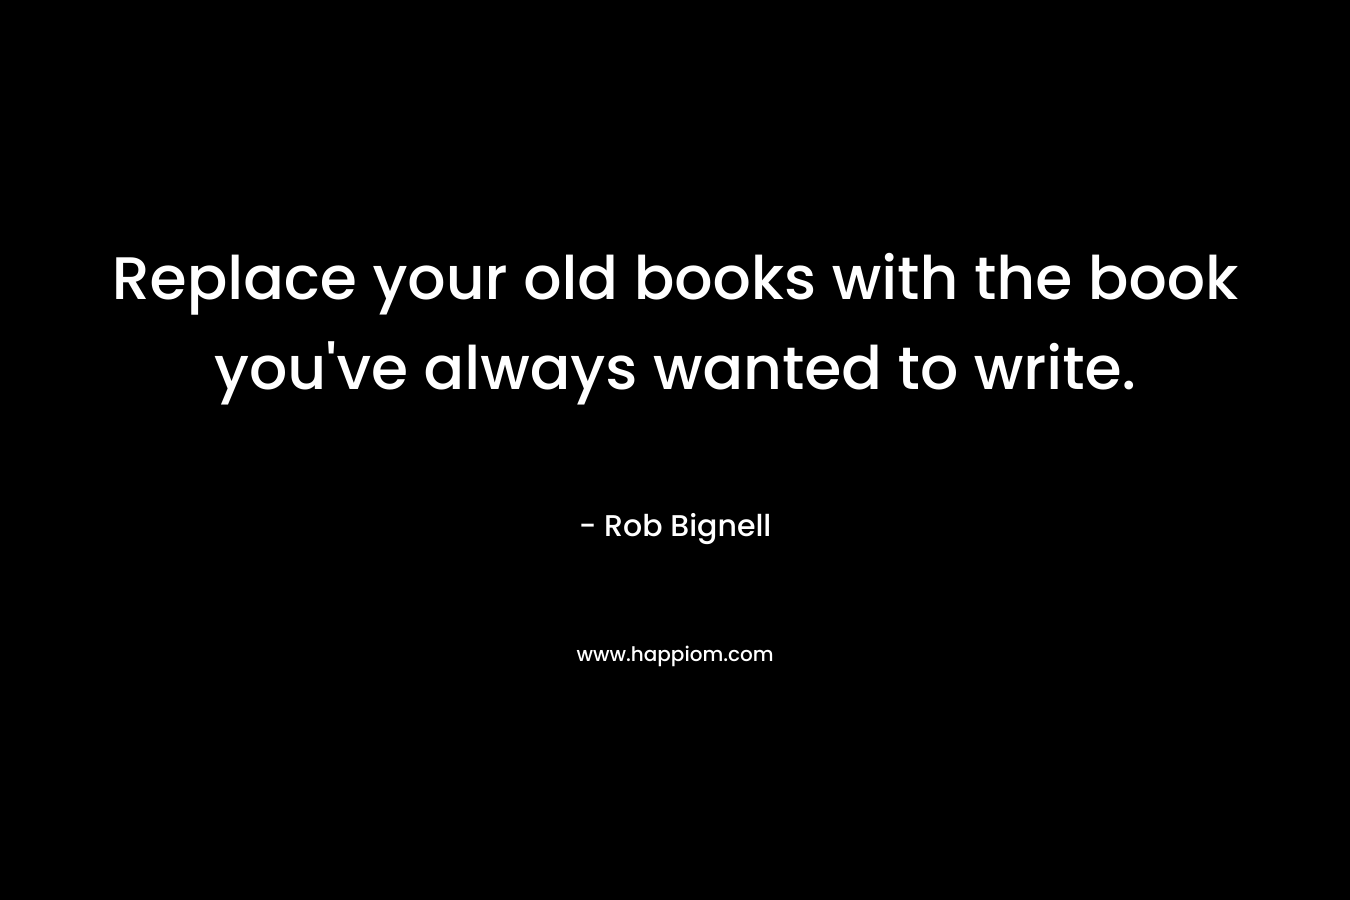 Replace your old books with the book you've always wanted to write.